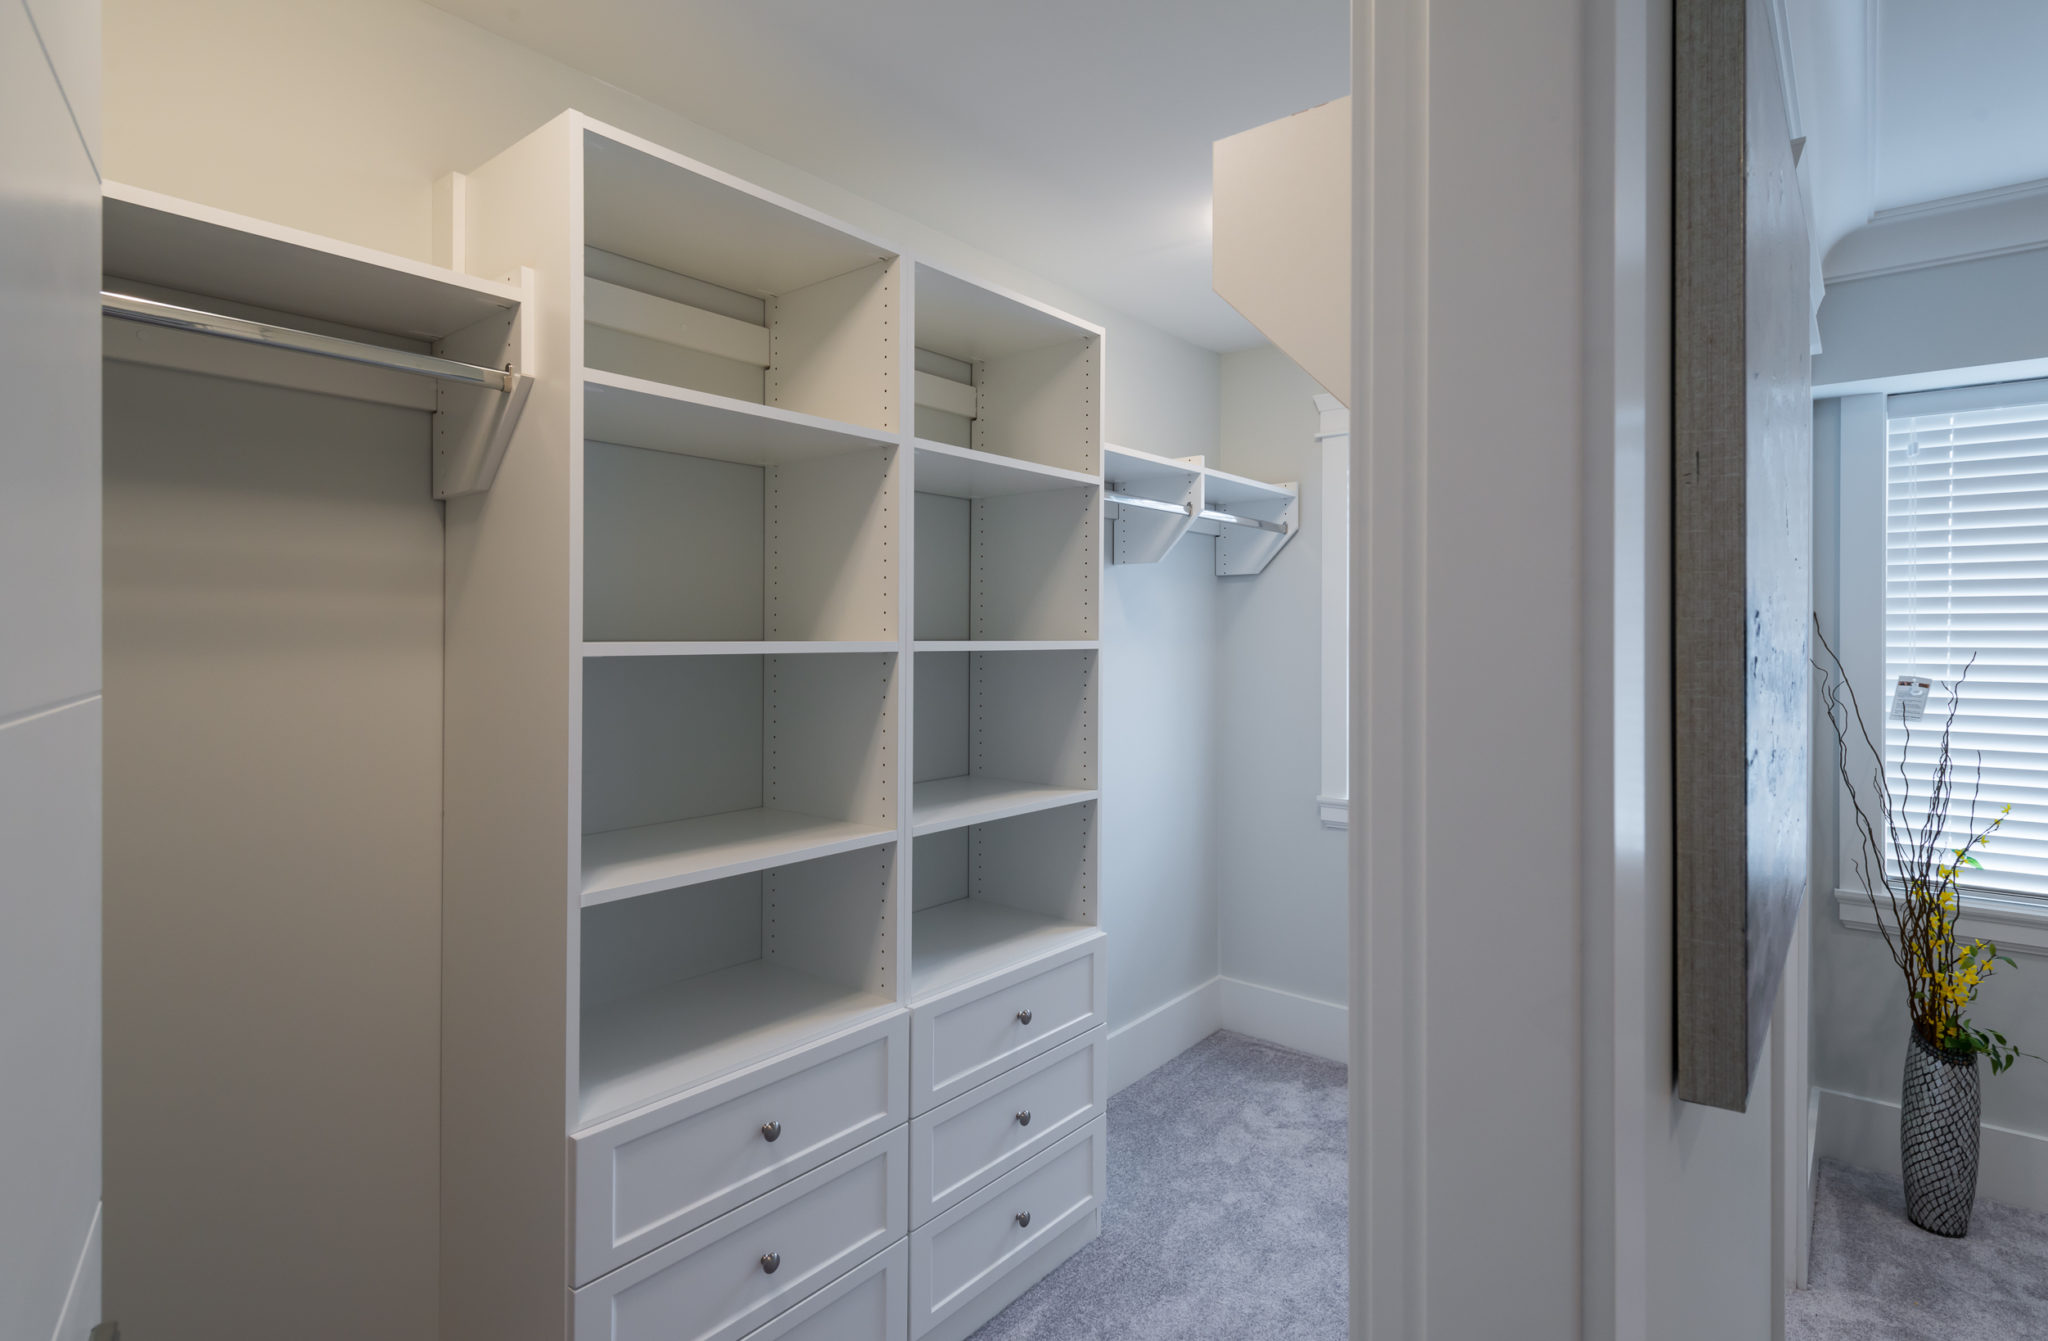 Building A New House? Don’t Forget the Custom Closet